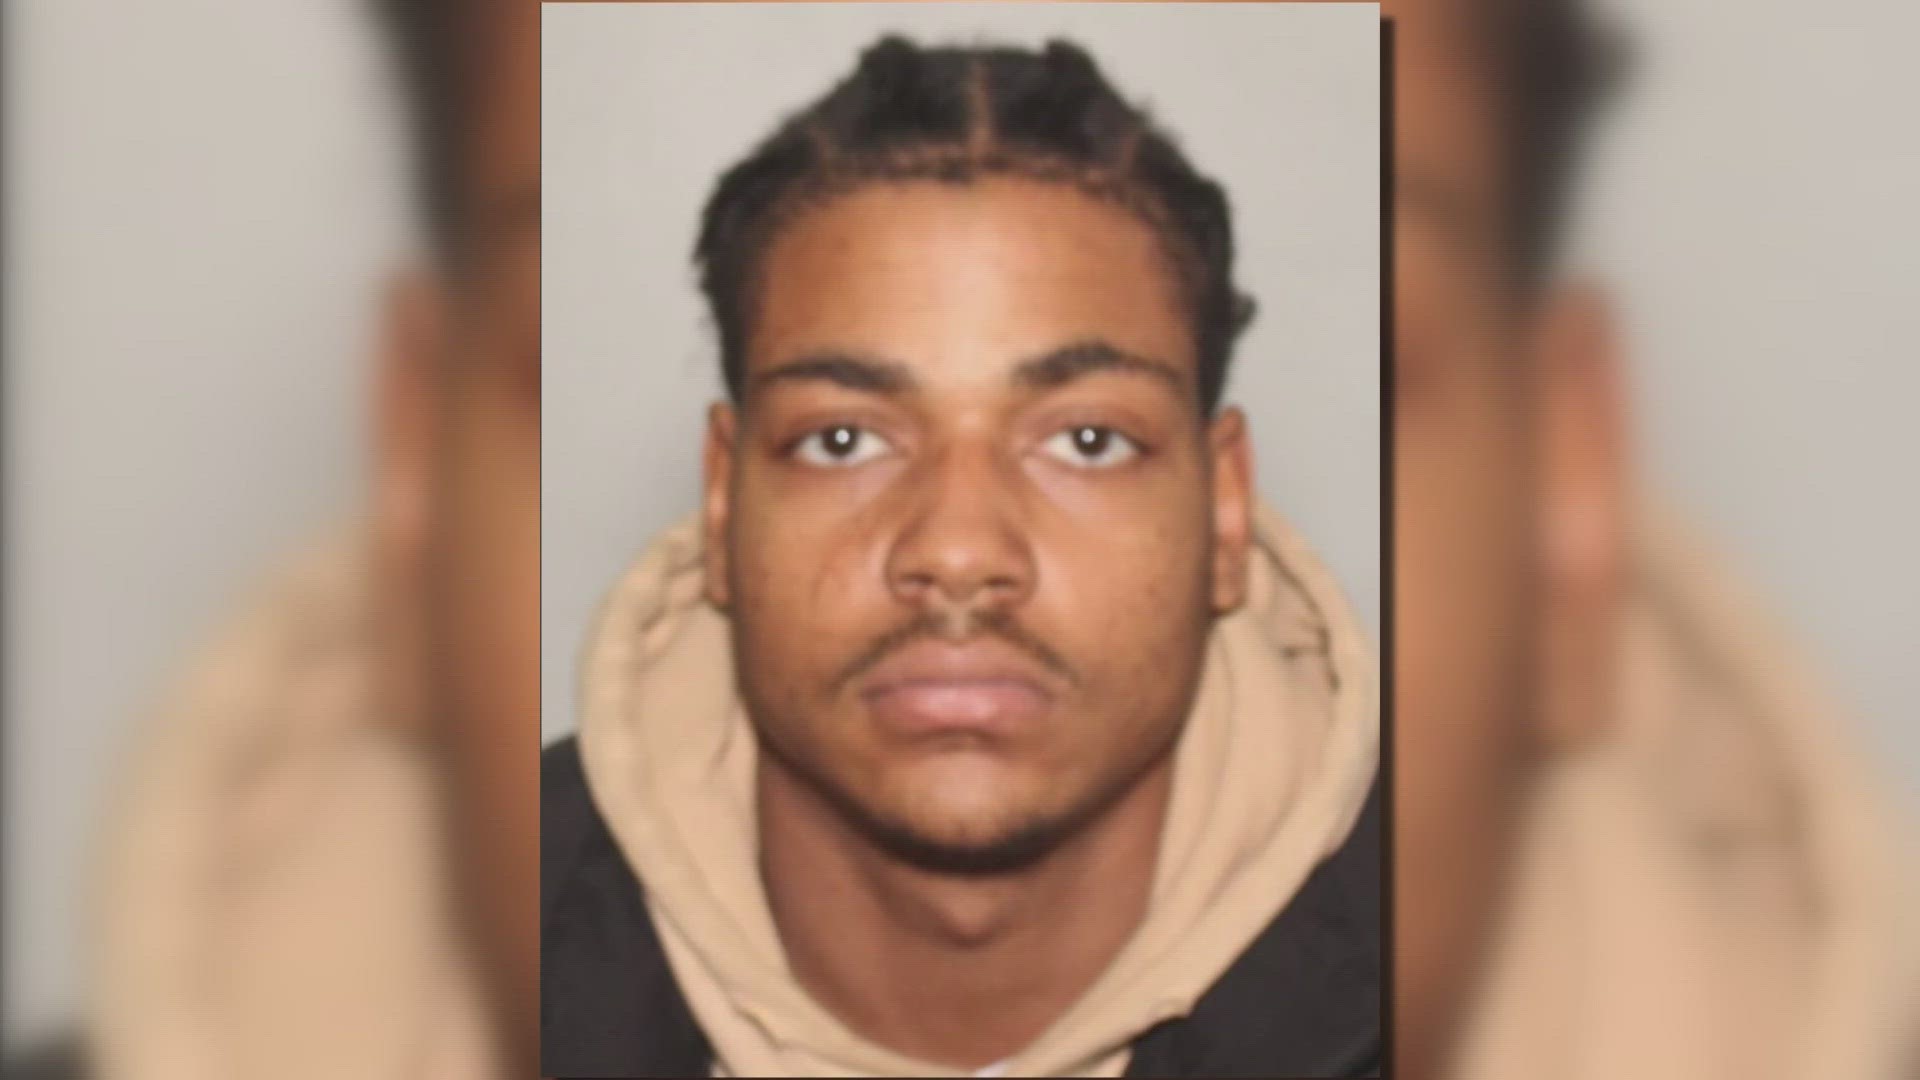 22-year-old Meon'te Robinson is charged with aggravated murder in connection with the death of Cunningham, who played football and basketball for the Tarblooders.